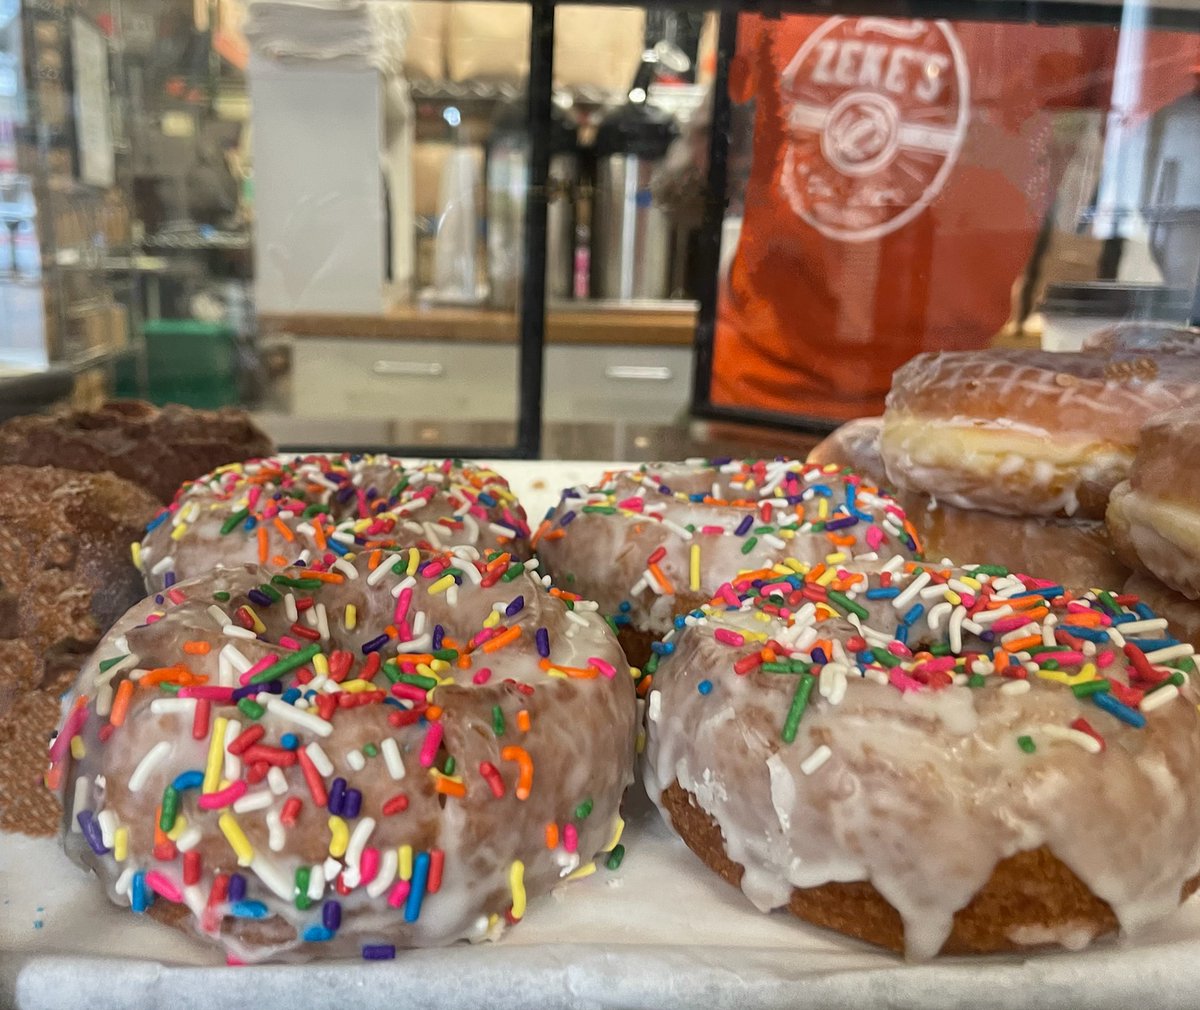 It’s only Monday, but we’re already thinking about @ZekesCoffeeDC's new weekend special. The Woodridge roastery at 2300 Rhode Island Ave. now offers @AstroDoughnuts Friday through Sunday, including glazed, cinnamon & sugar, and rainbow sprinkles. bit.ly/3IyI7o6 @eaterdc